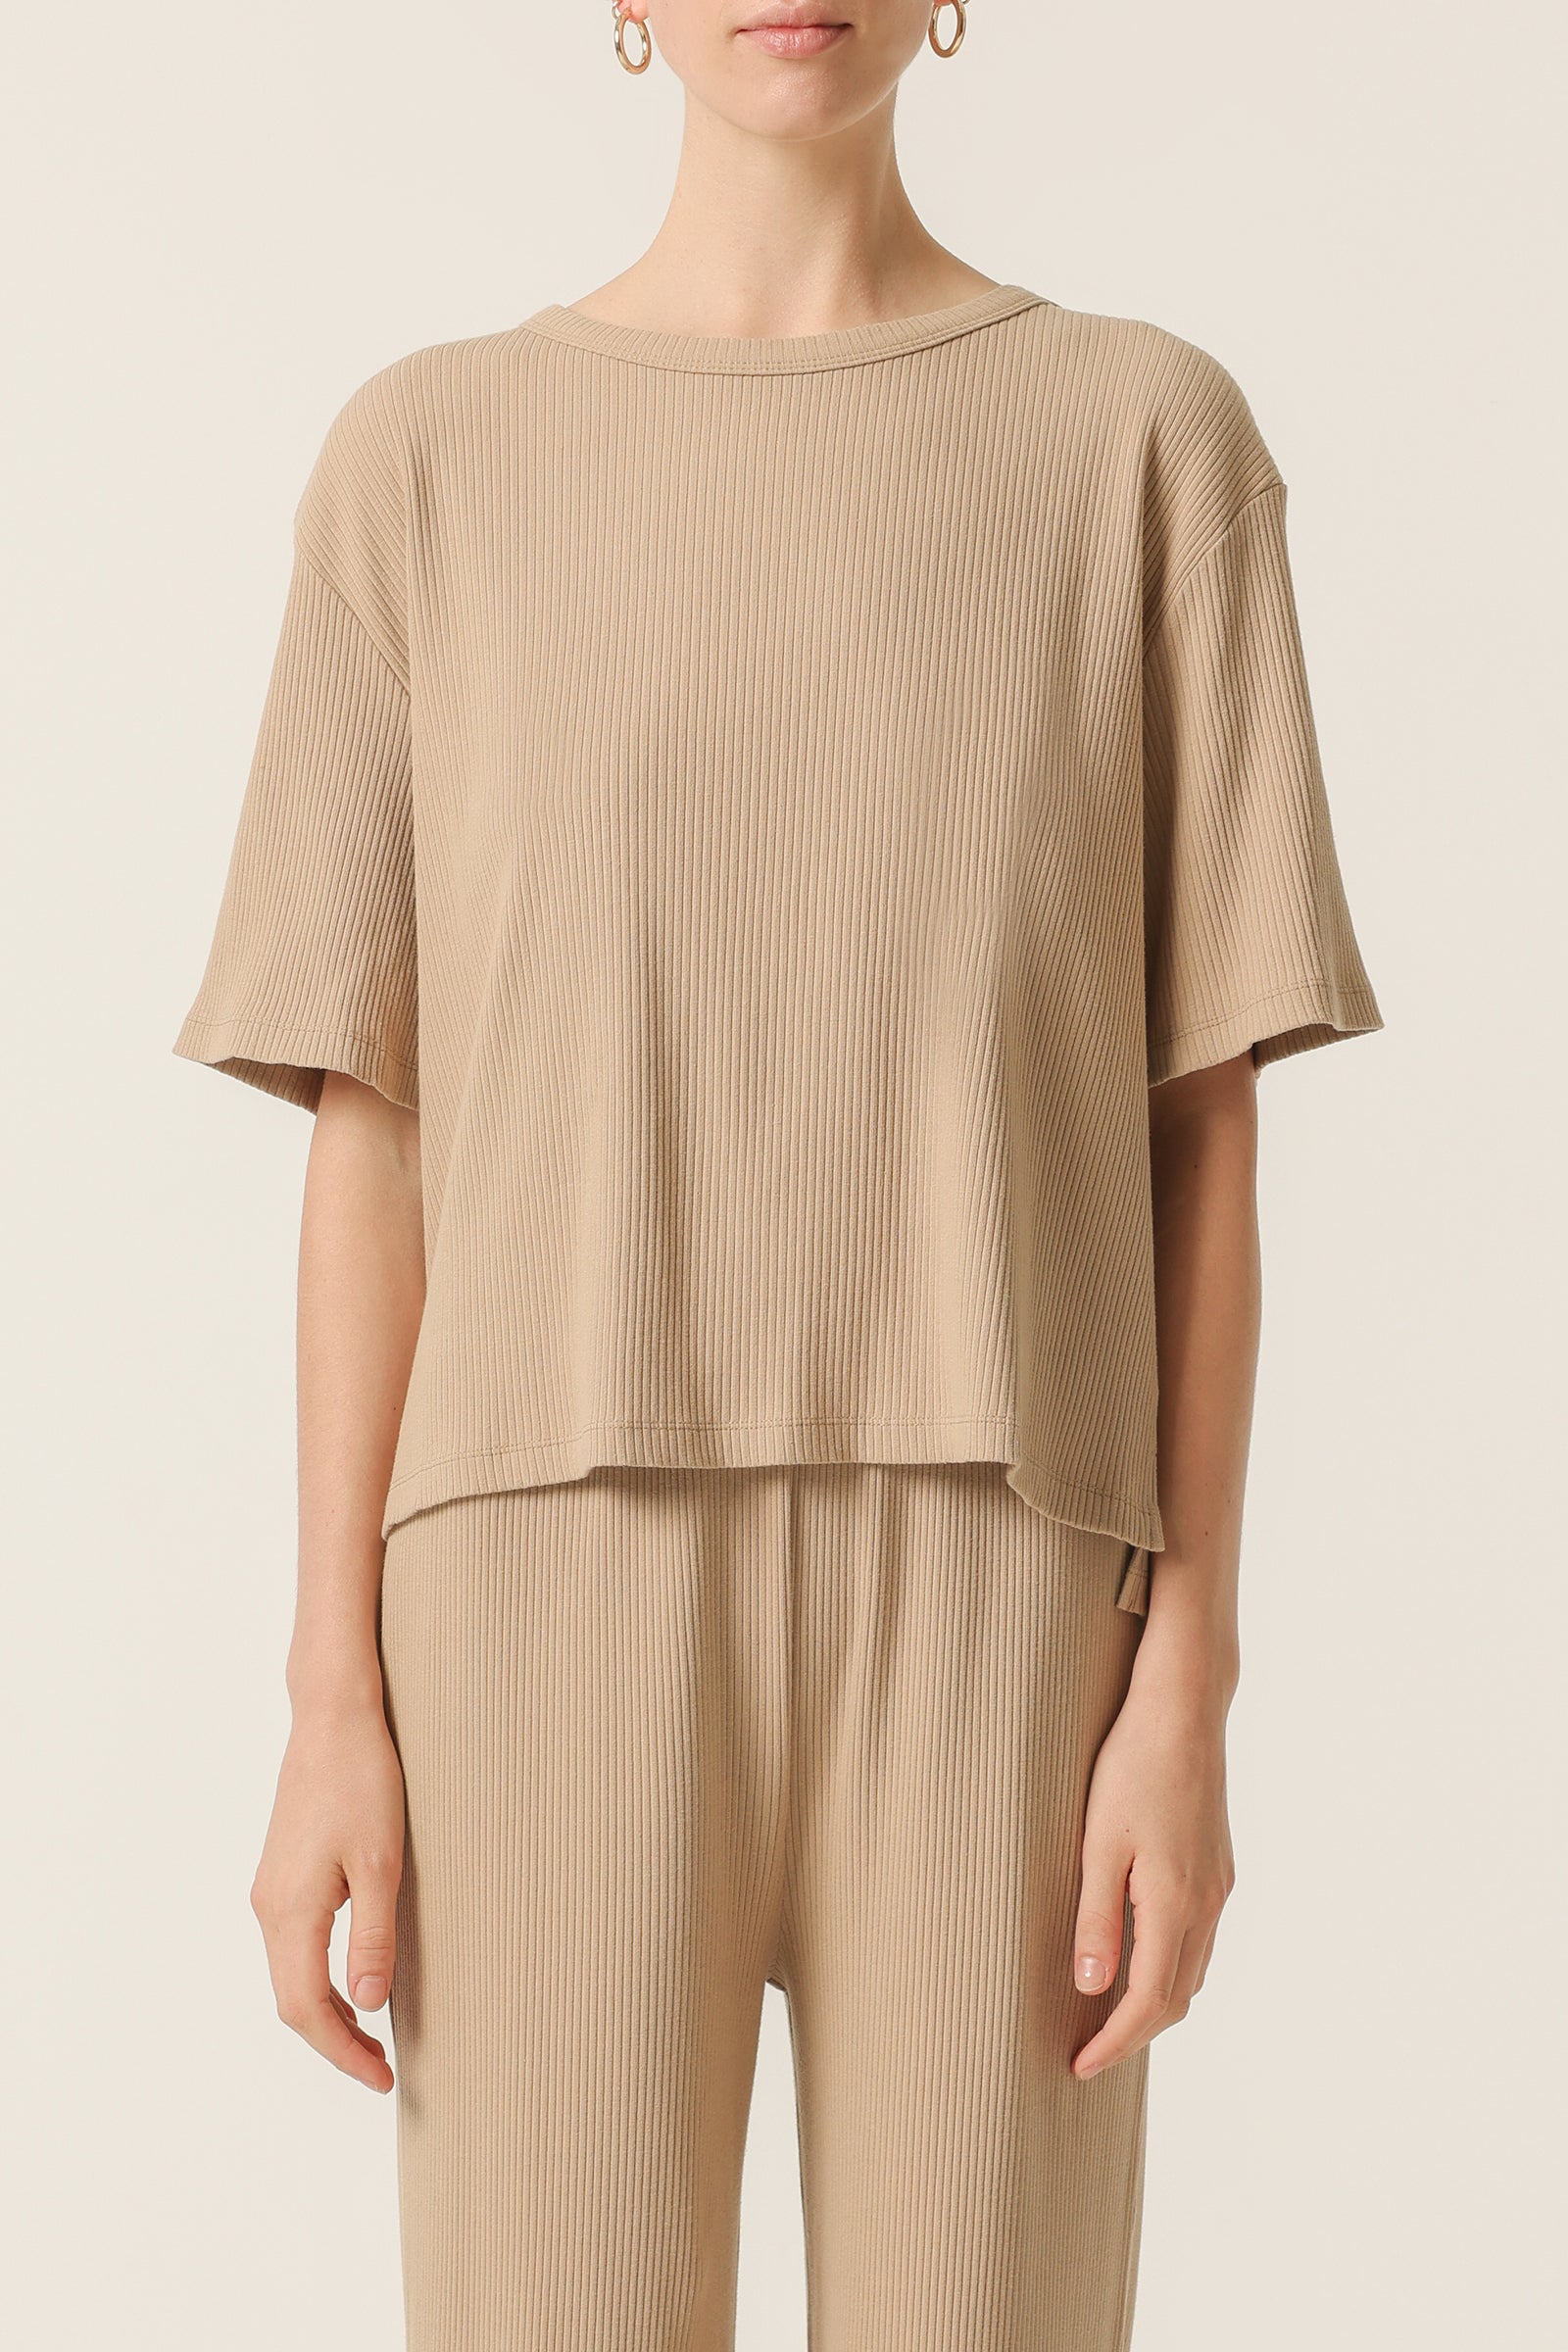 Nude Lucy Lounge Rib Tee In A Beige Sepia Colour 